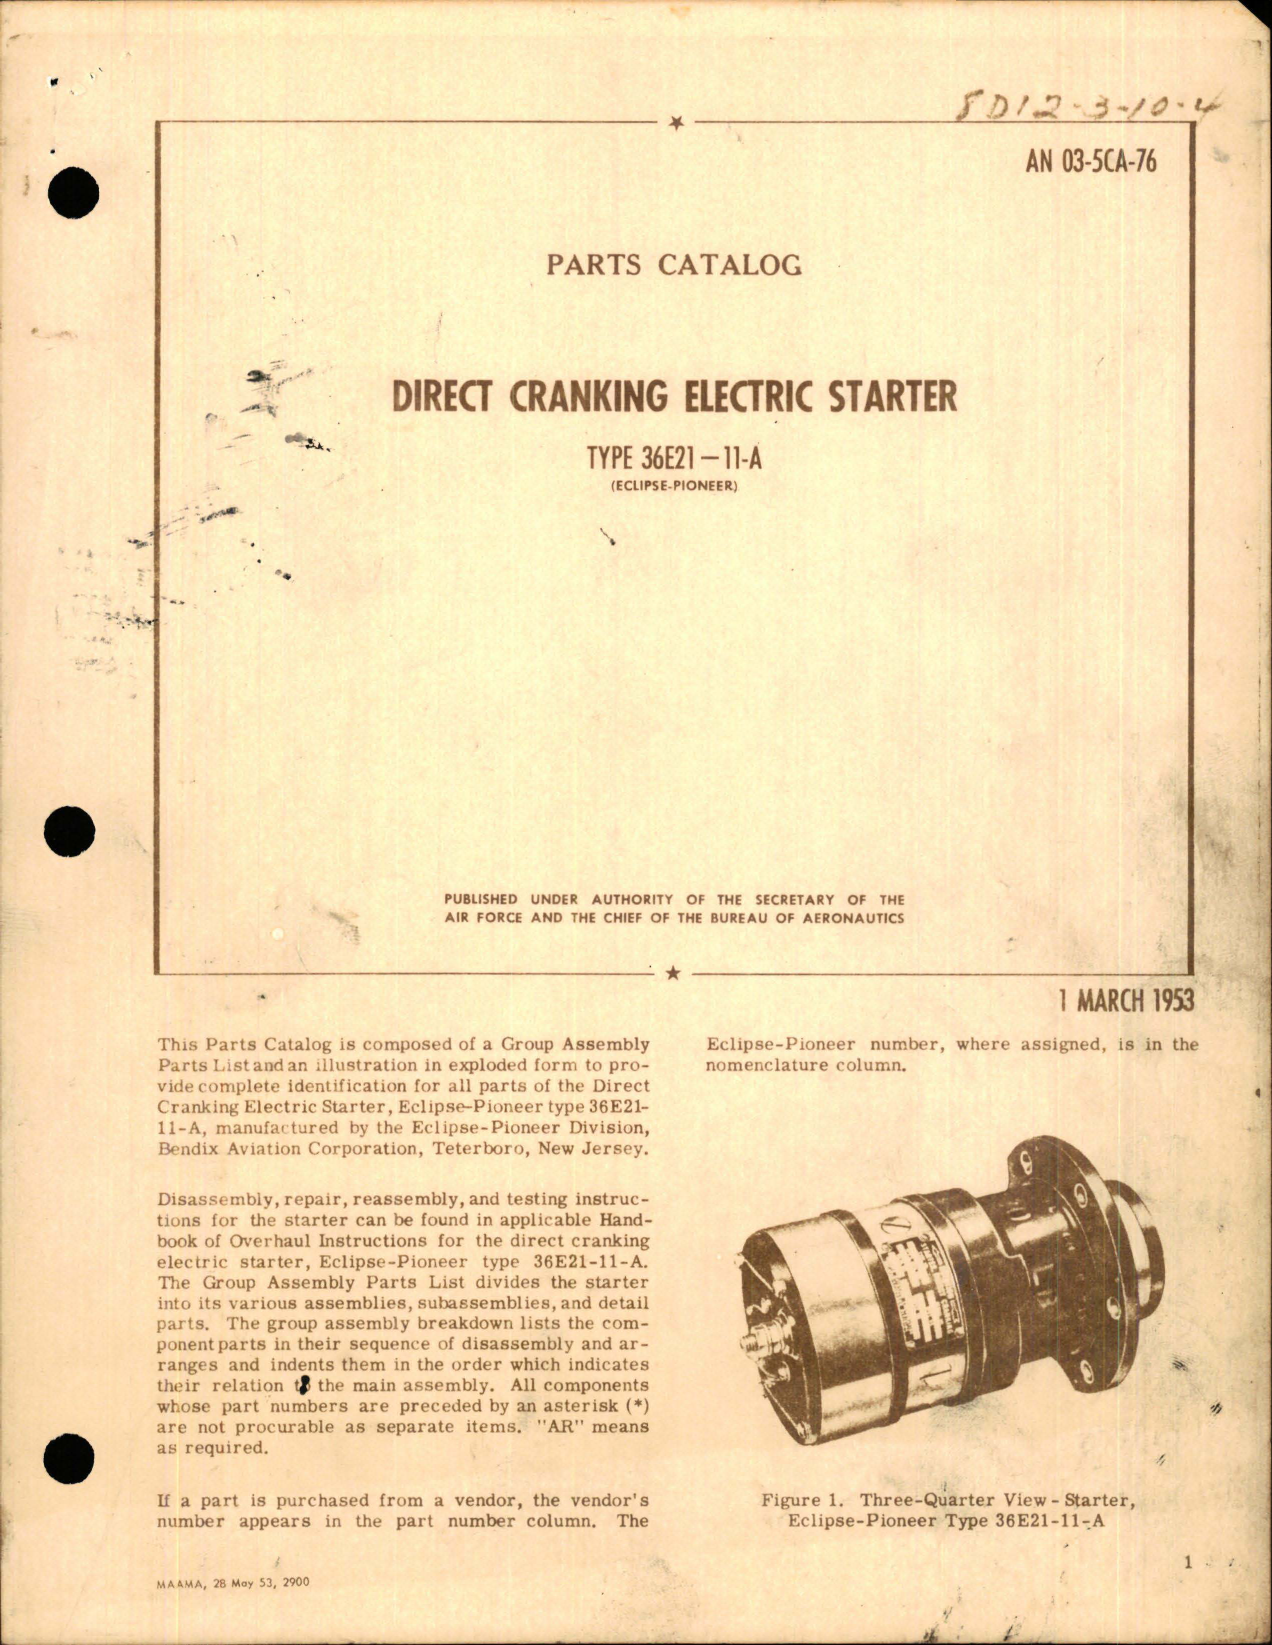 Sample page 1 from AirCorps Library document: Parts Catalog for Direct Cranking Electric Starter - Type 36E21-11-A